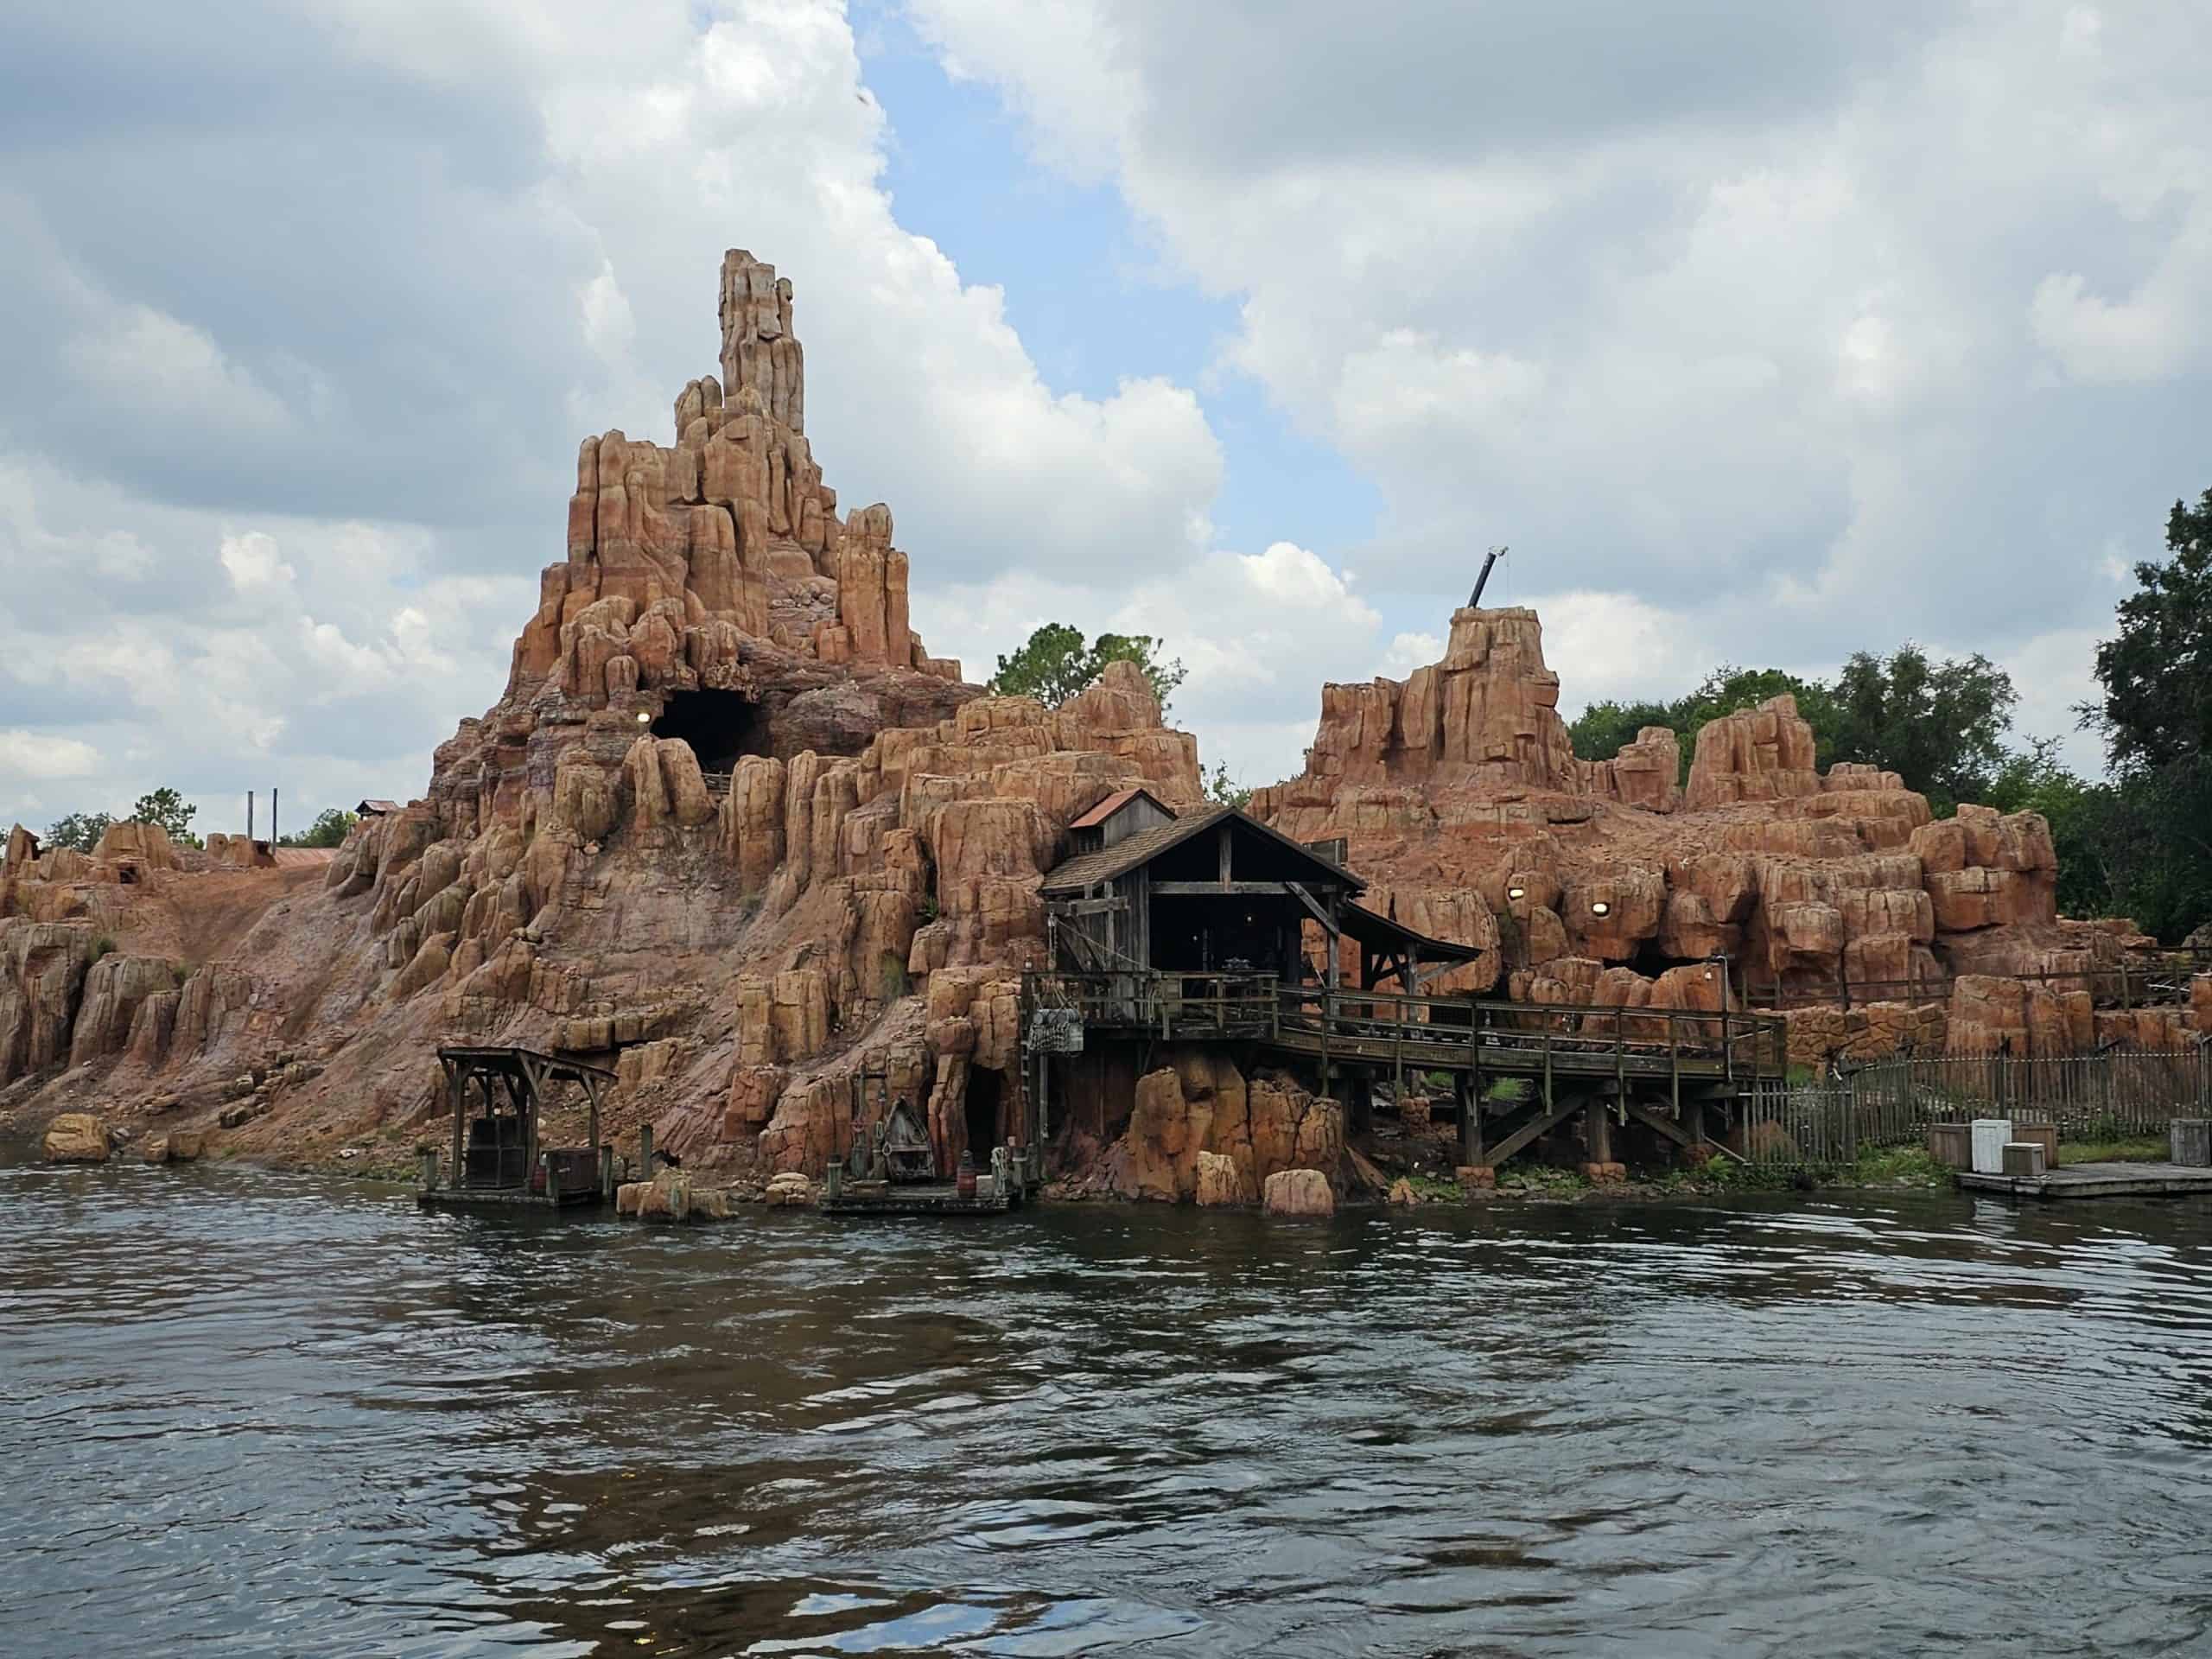 <p>A trip to Disney World wouldn't be complete without taking a ride on Big Thunder Mountain Railroad. The outdoor roller coaster can be tracked down in Frontierland, which is a special to folks who appreciate the iconic wild west theme. Big Thunder Mountain Road is considered a thrill ride with a few small drops. It has a height requirement of 40 inches or taller. The tunnels built throughout the ride make you feel like you're experiencing a true old-school train trip.</p>